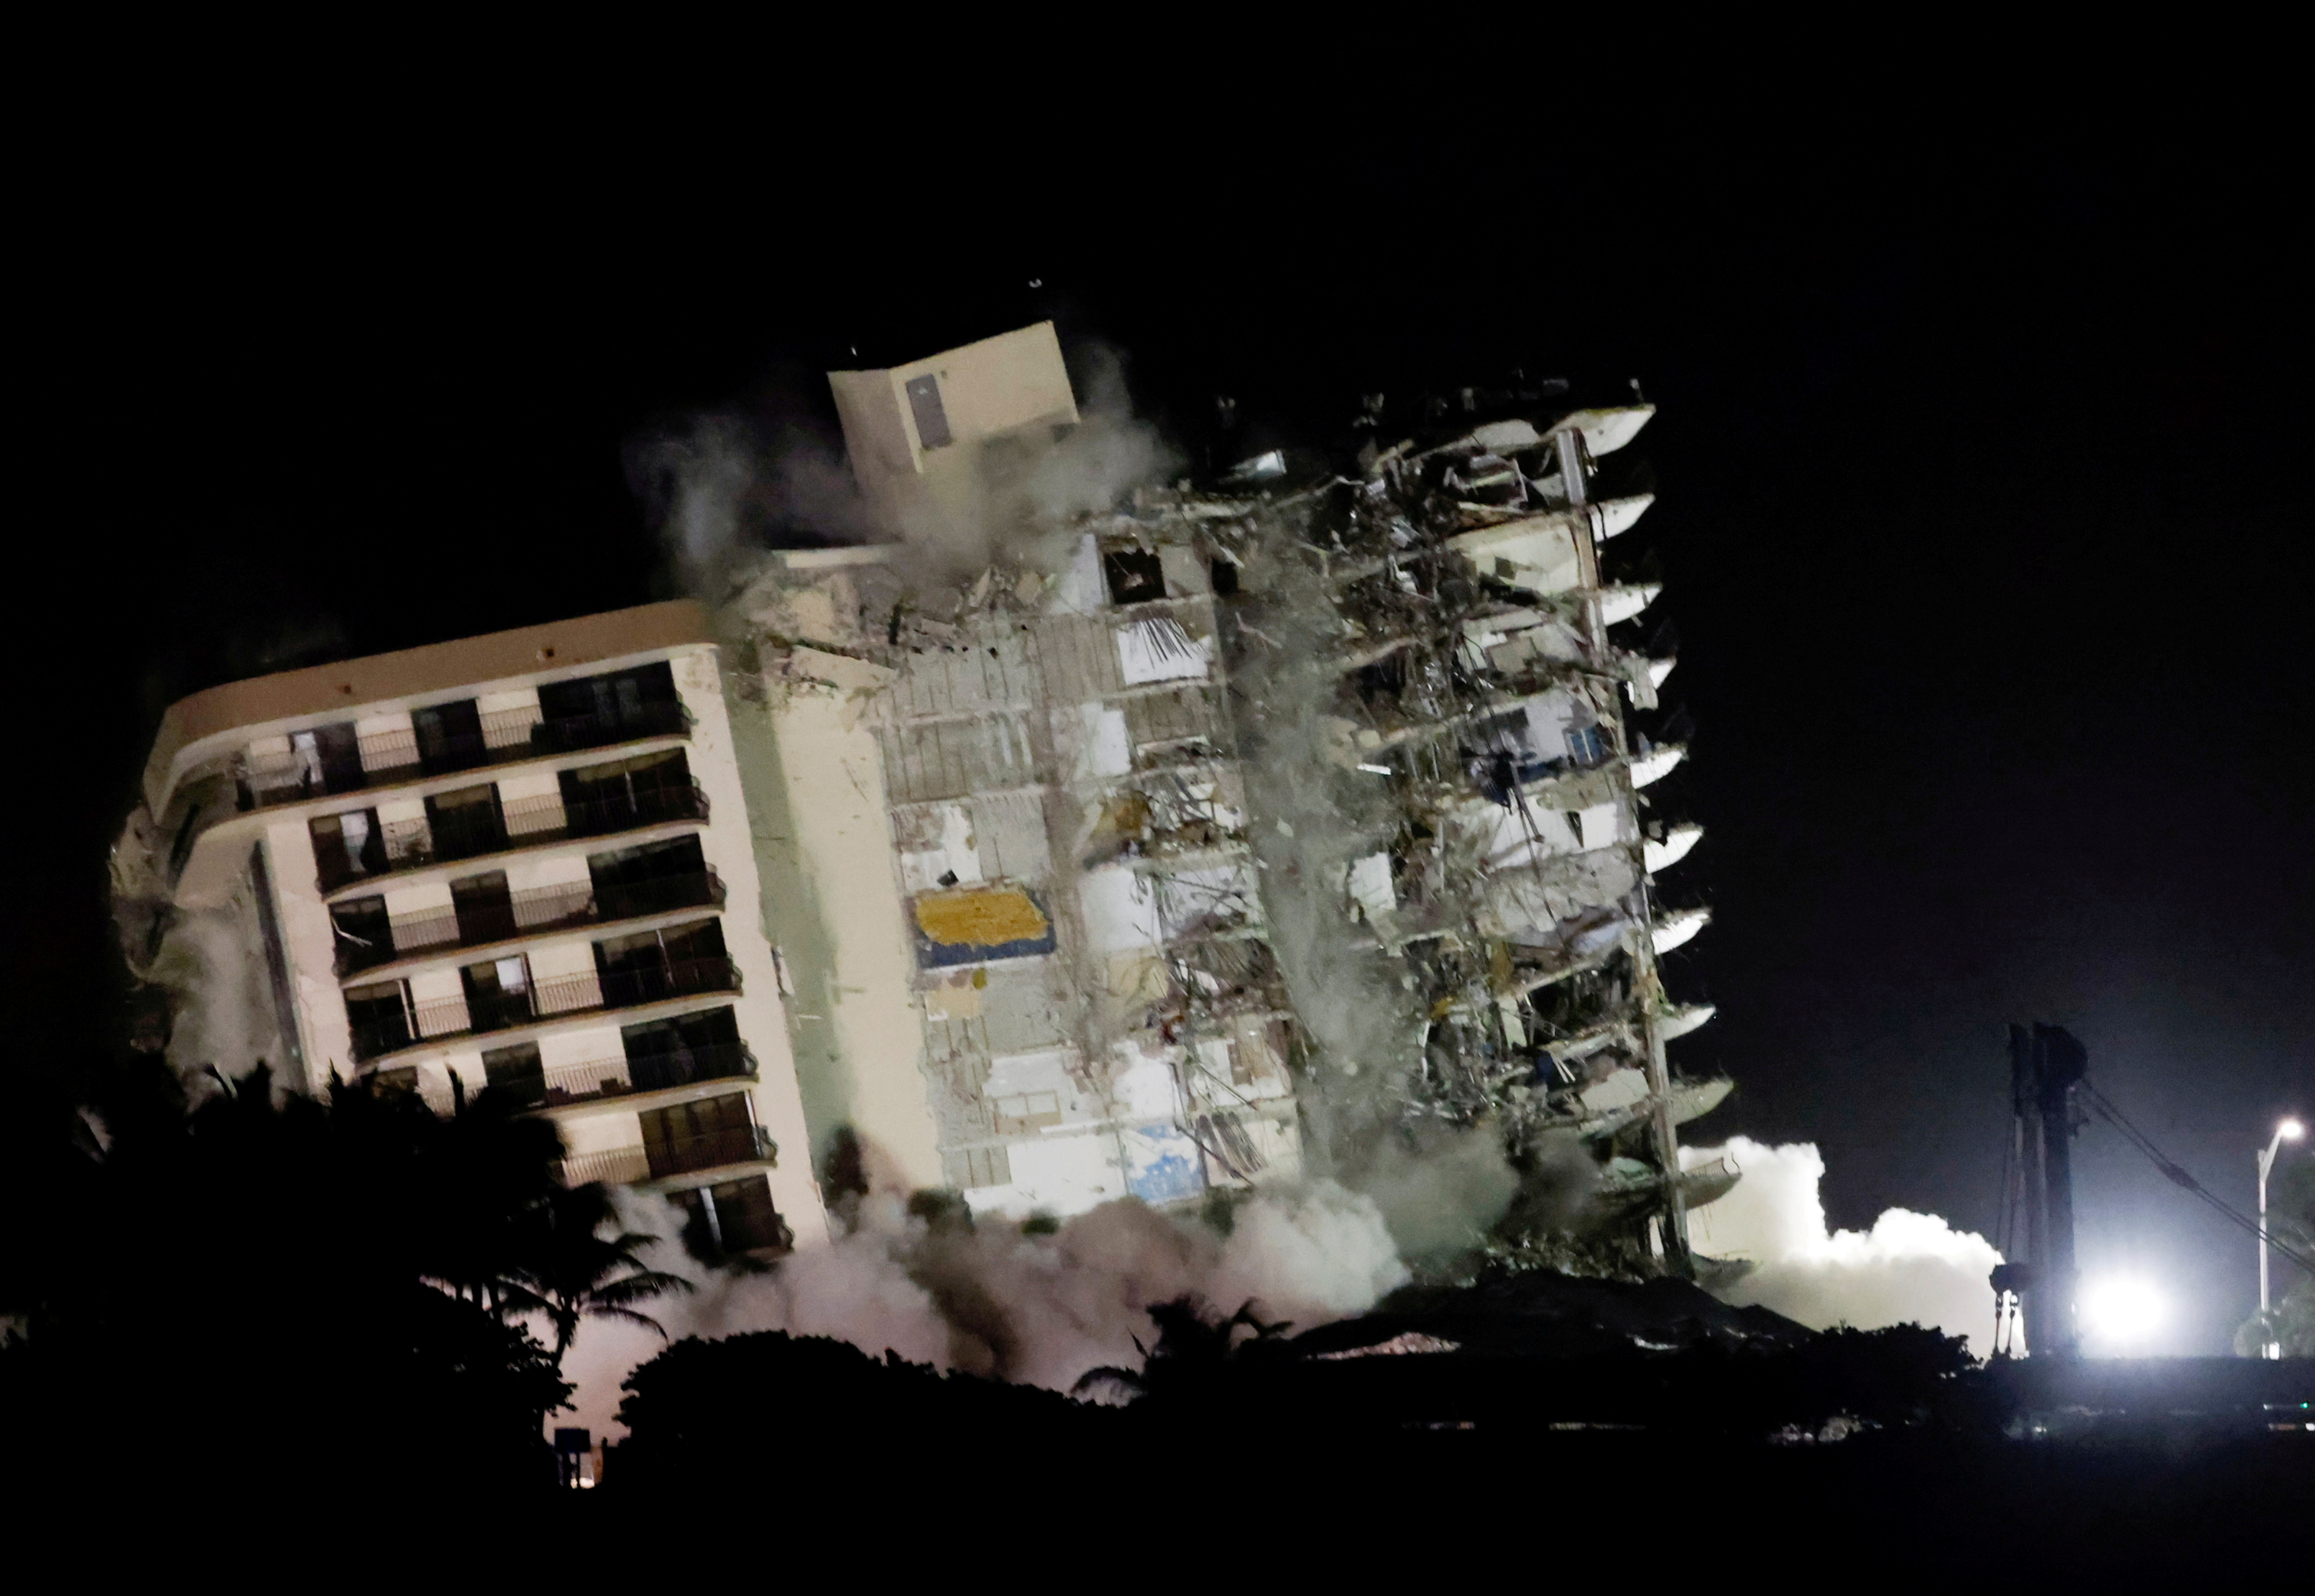 Final death toll from Florida condominium collapse put at 98 | Reuters